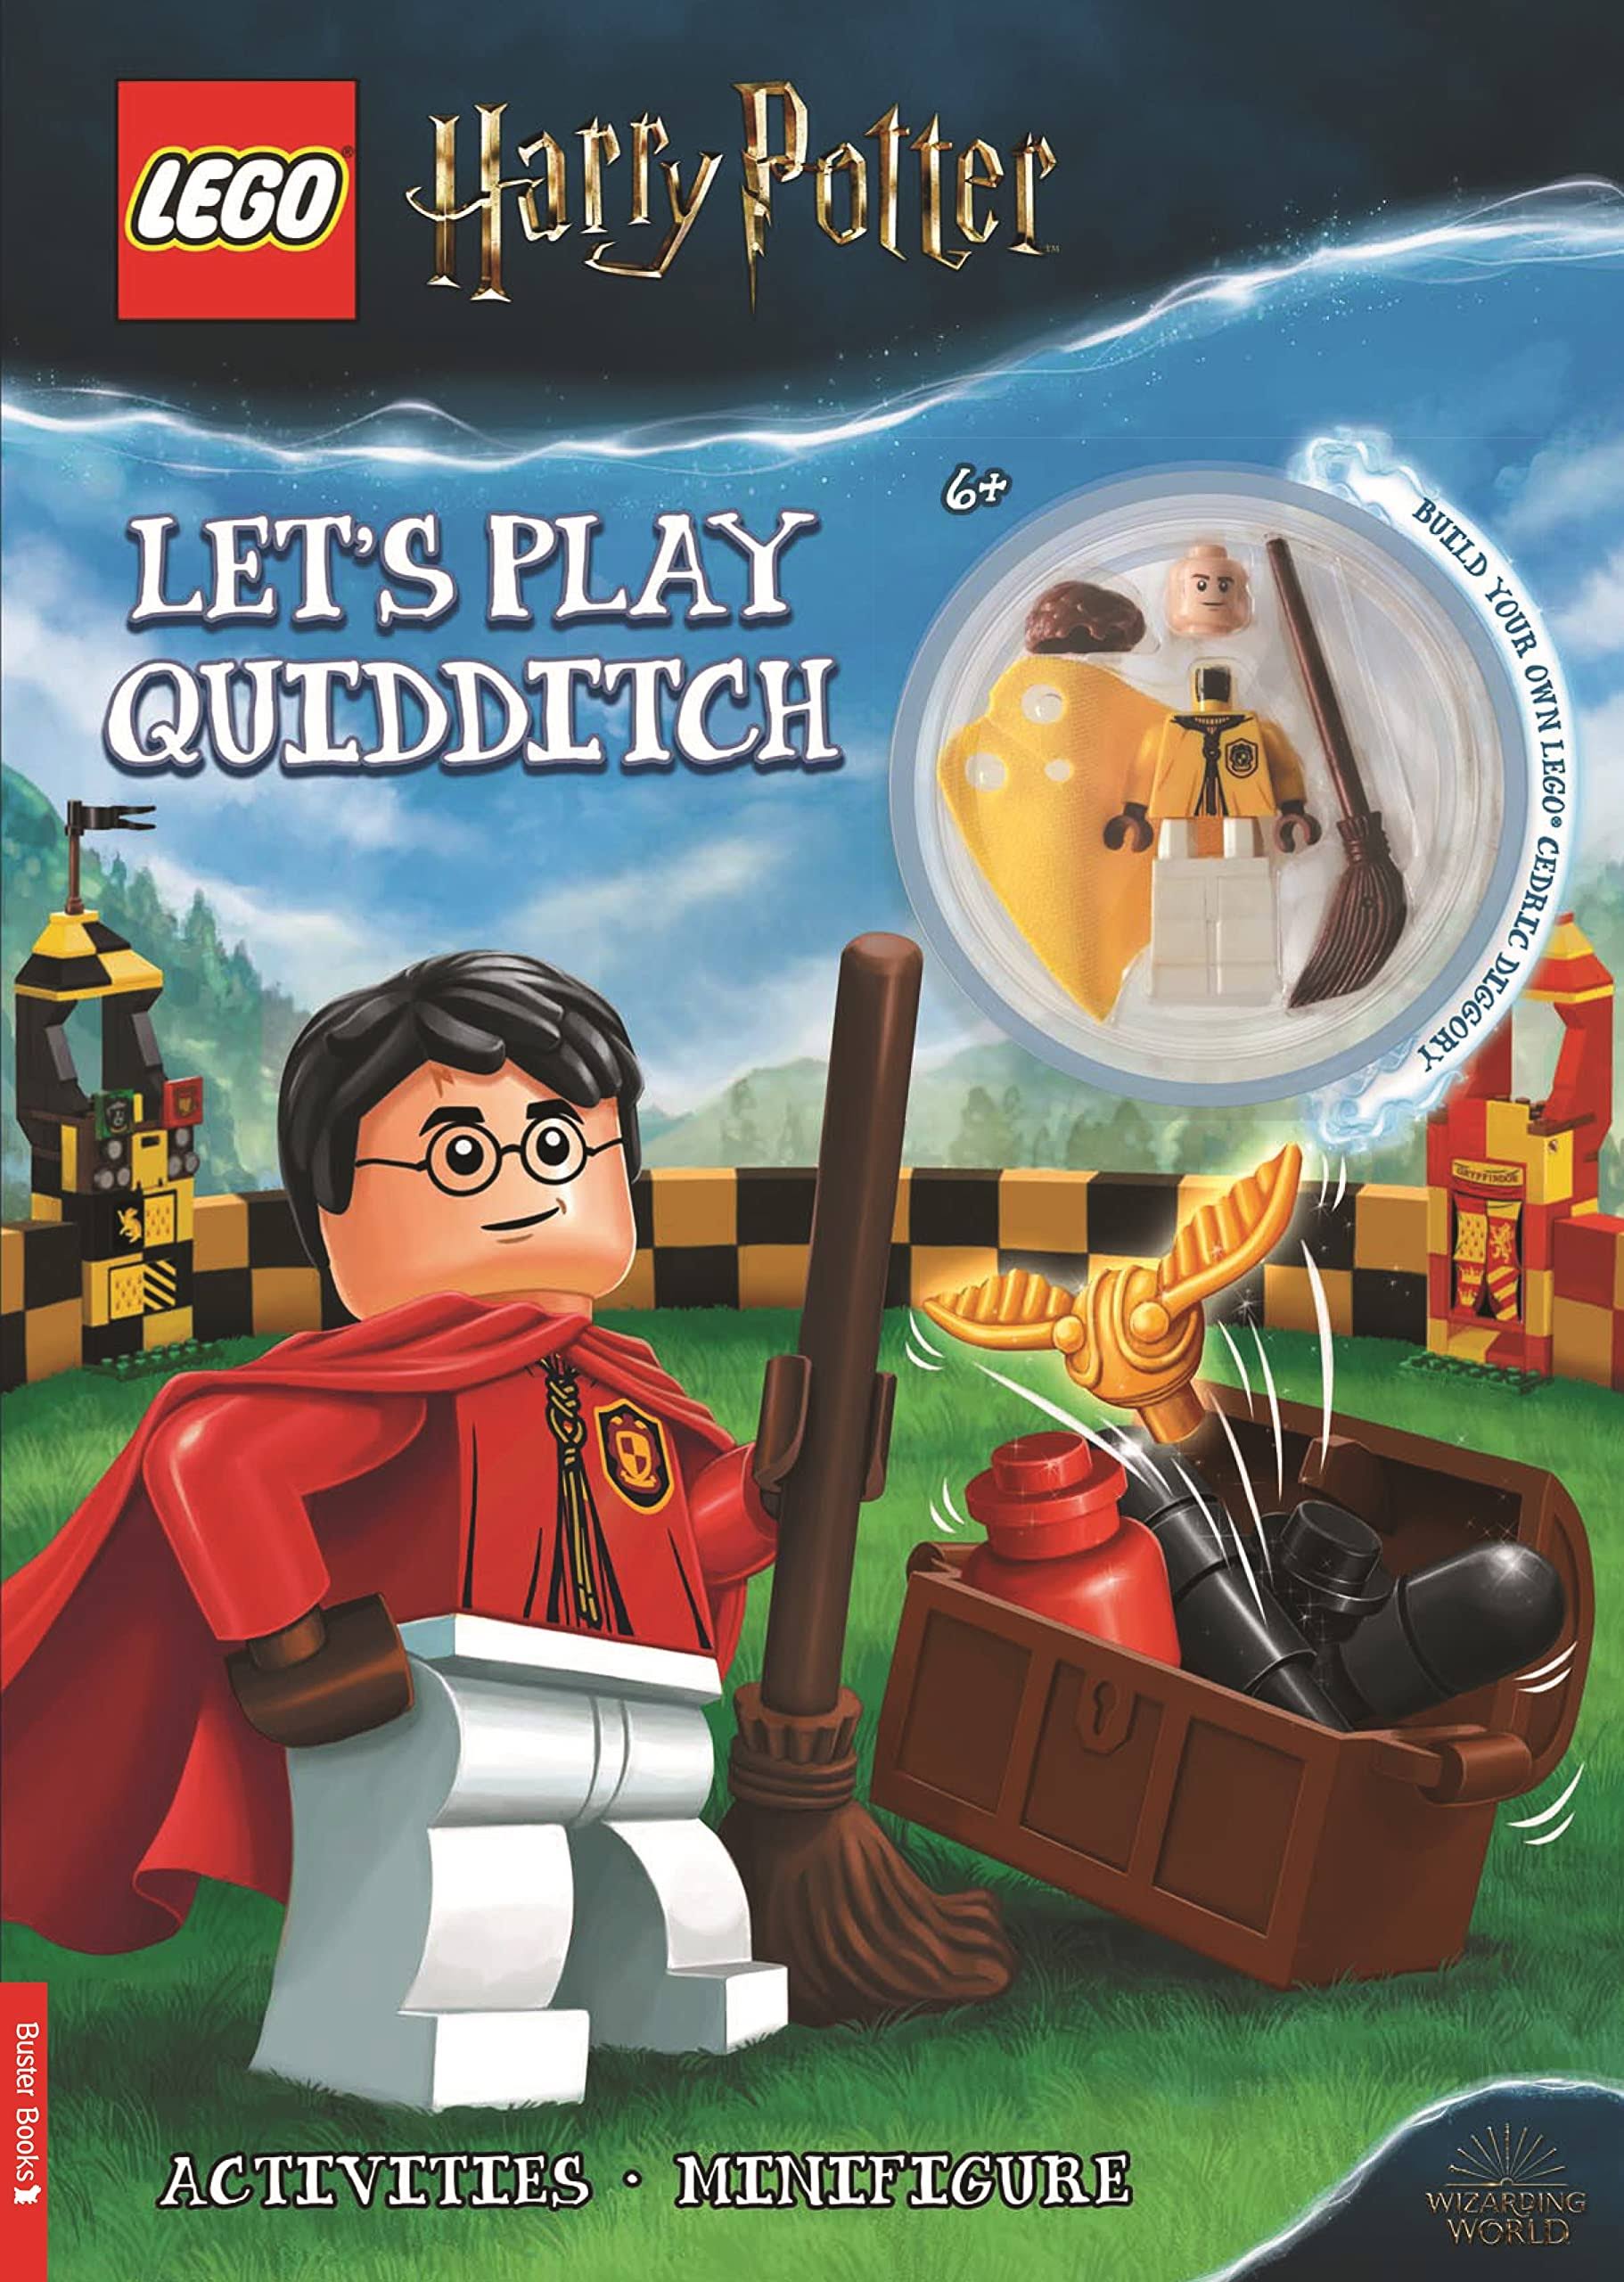 LEGO Harry Potter : Let's Play Quidditch by Buster Books